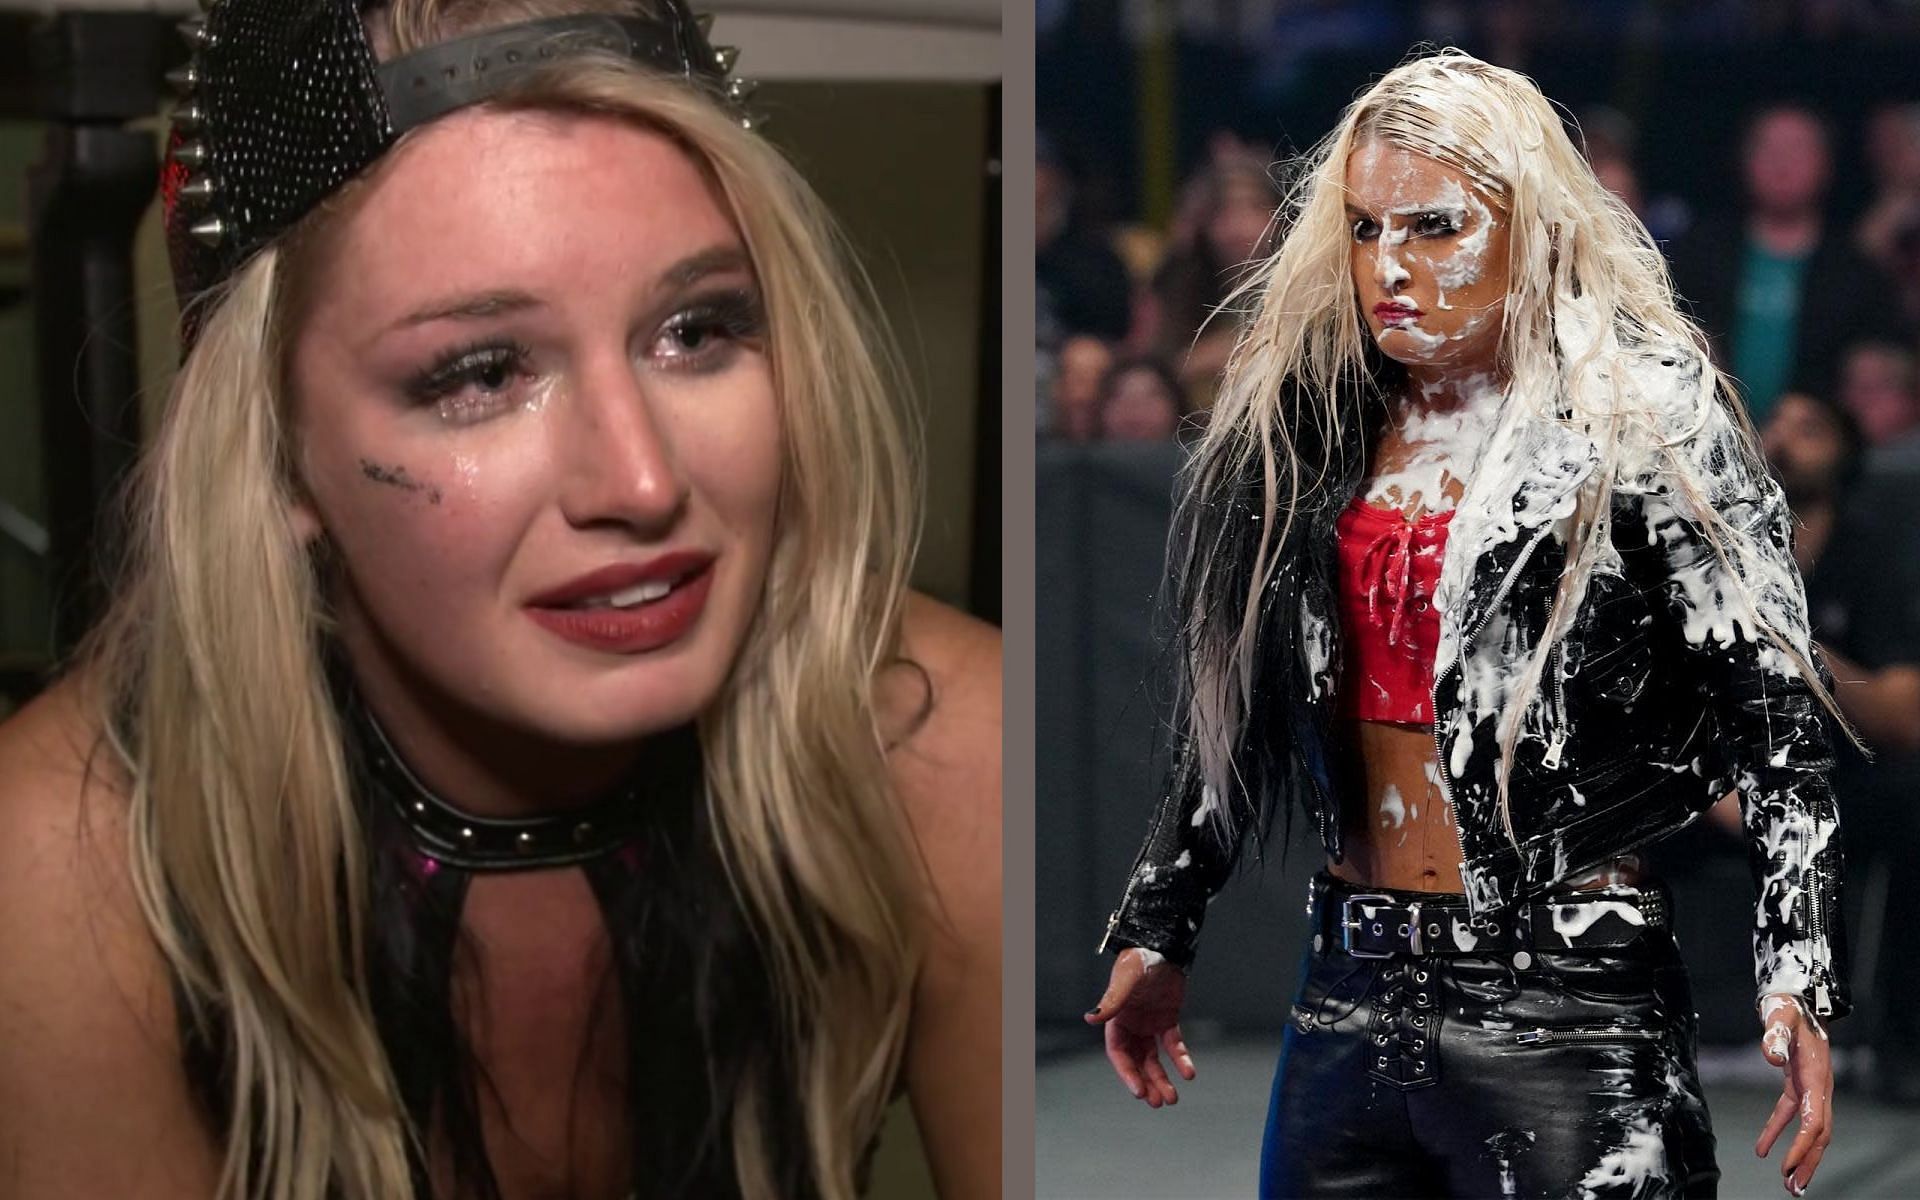 Toni Storm won Mae Young Classic in 2018